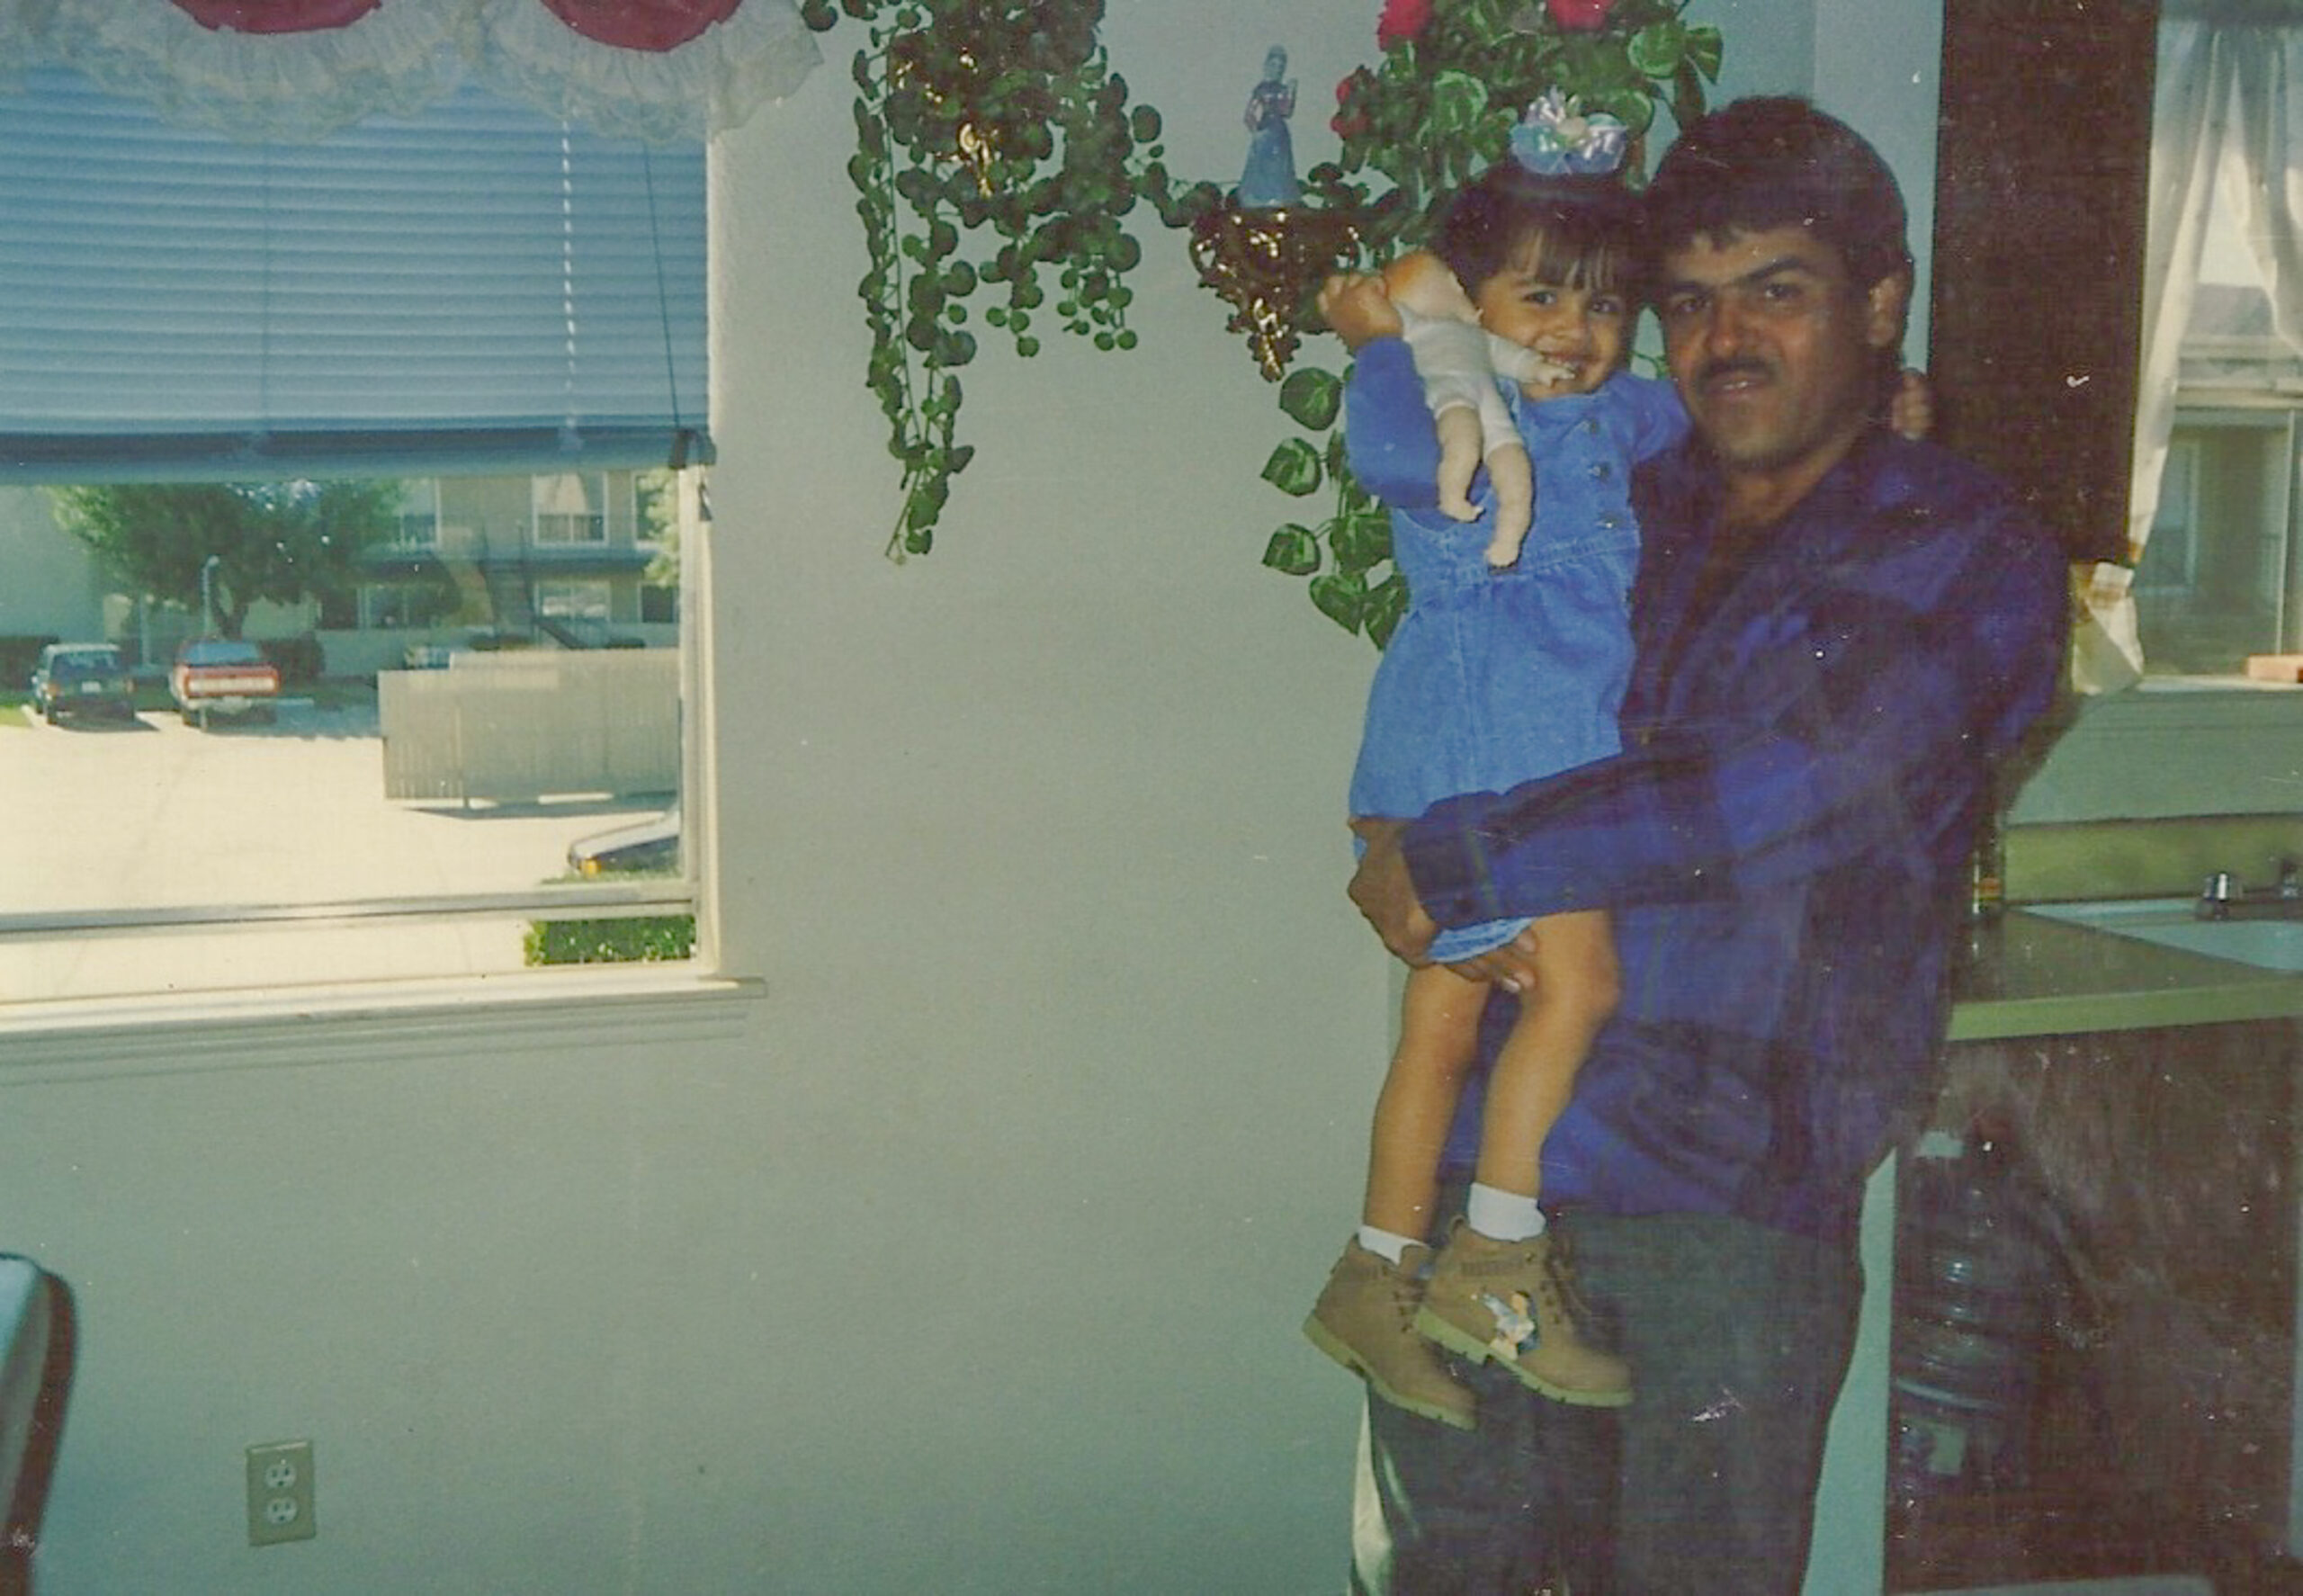 Antelmo Ramirez, as a younger man, holds his young daughter inside a dwelling.